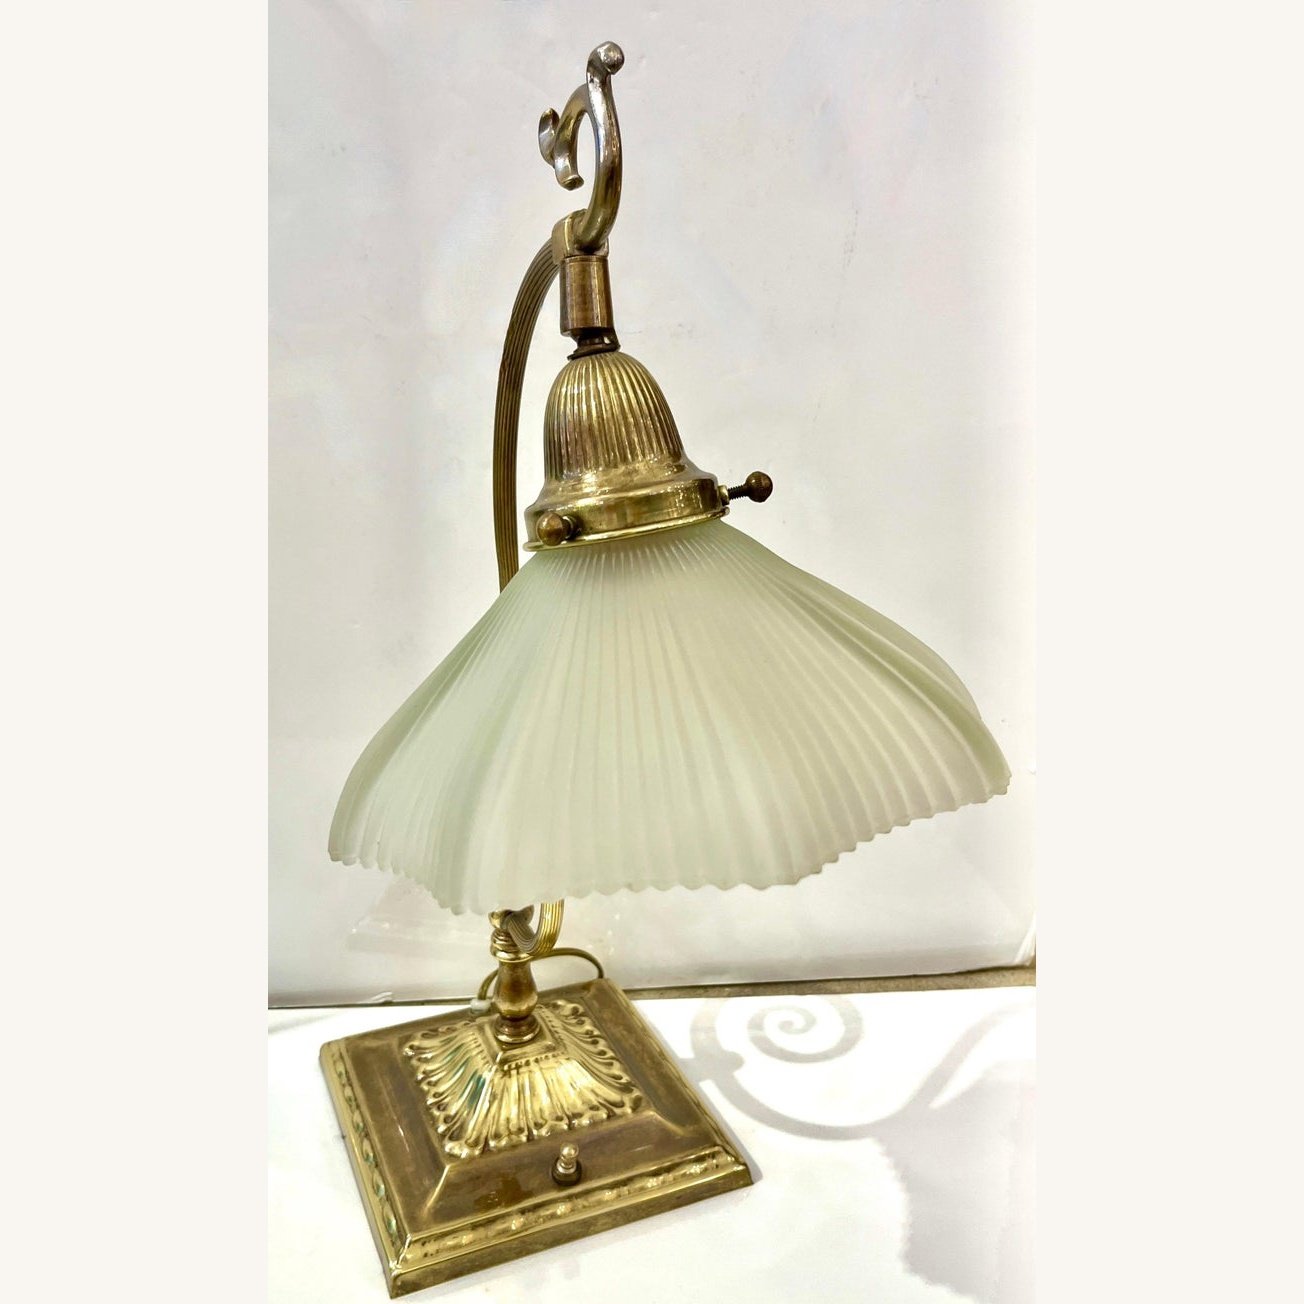 1950s American Art Deco Style Brass Table/Desk Lamp with Satin White Glass Shade